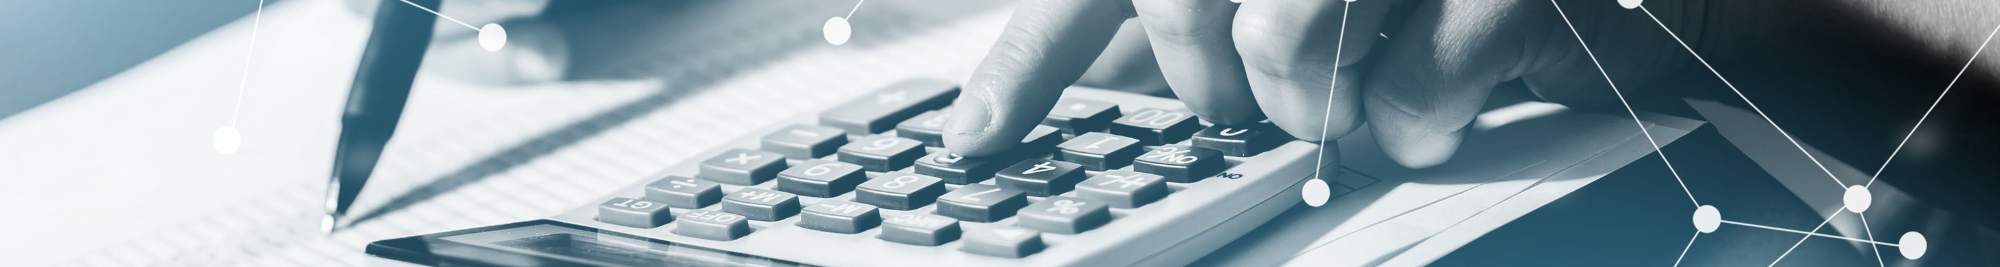 Close up image of a person holding and pen and using a calculator